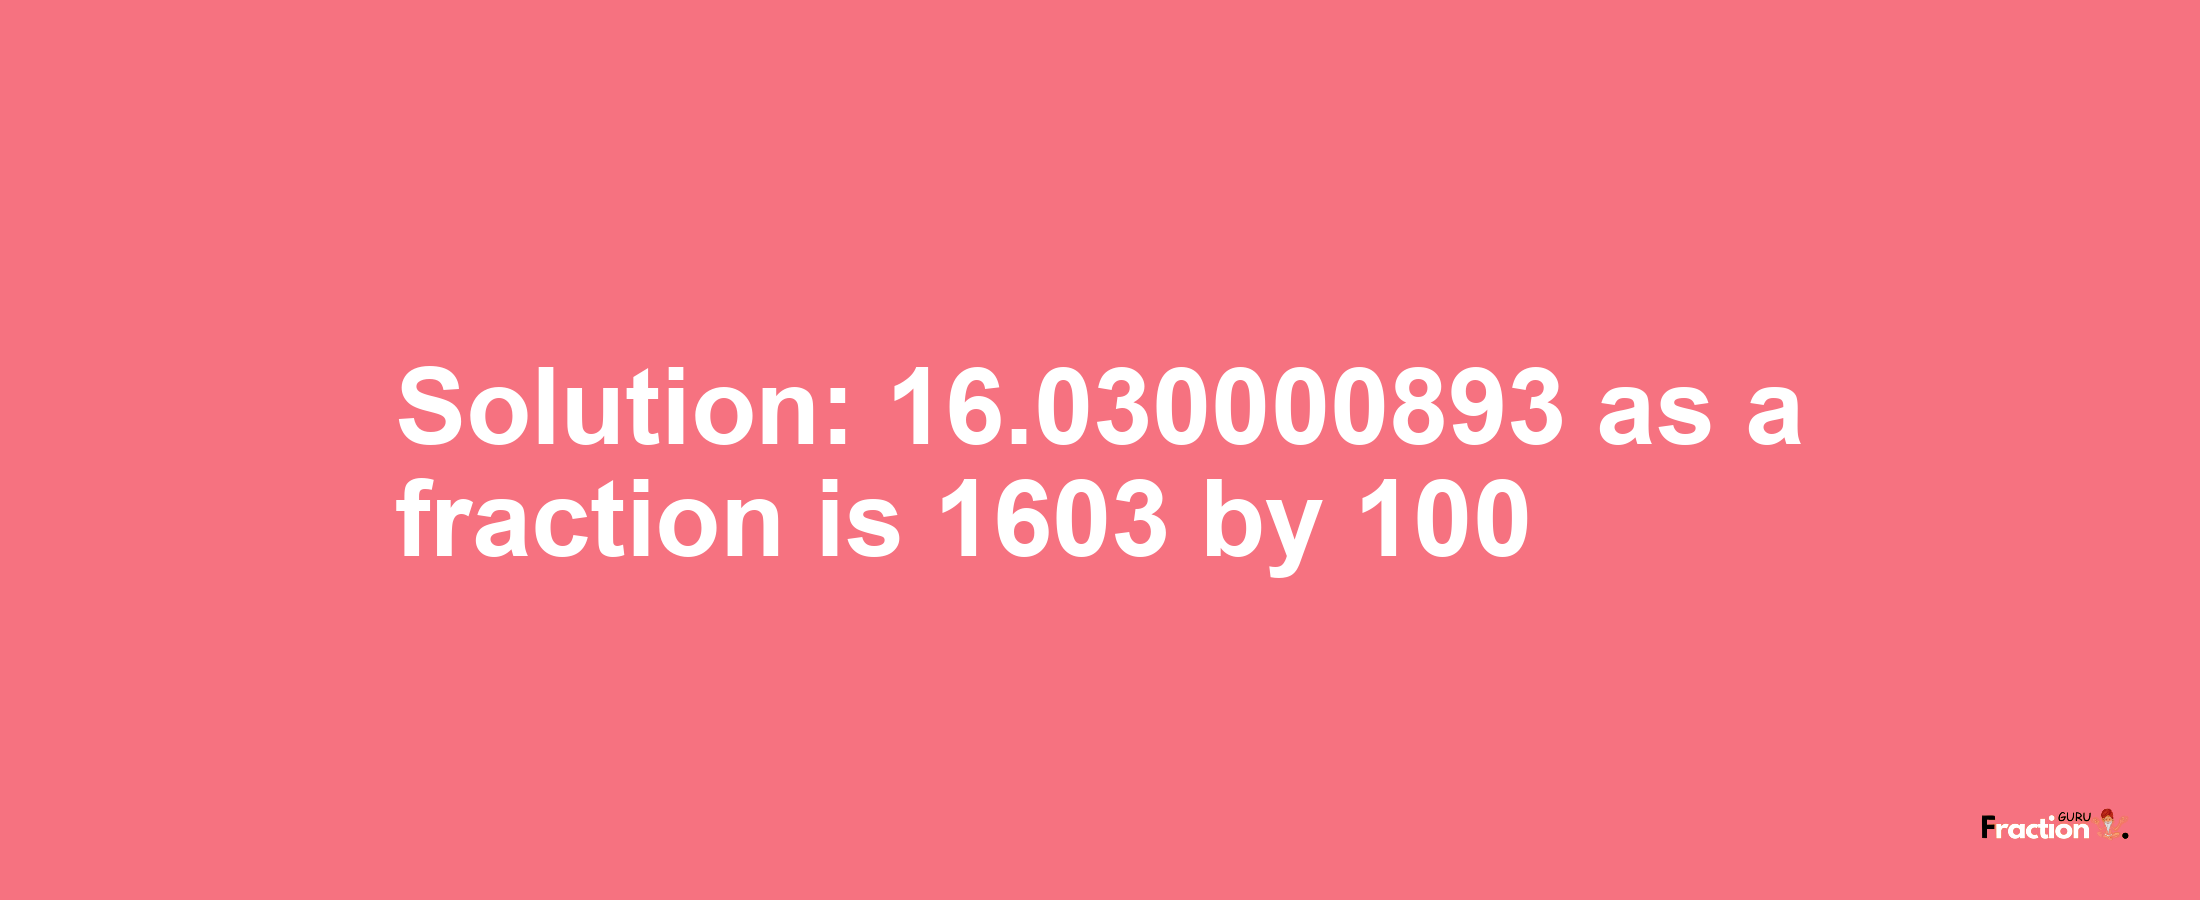 Solution:16.030000893 as a fraction is 1603/100